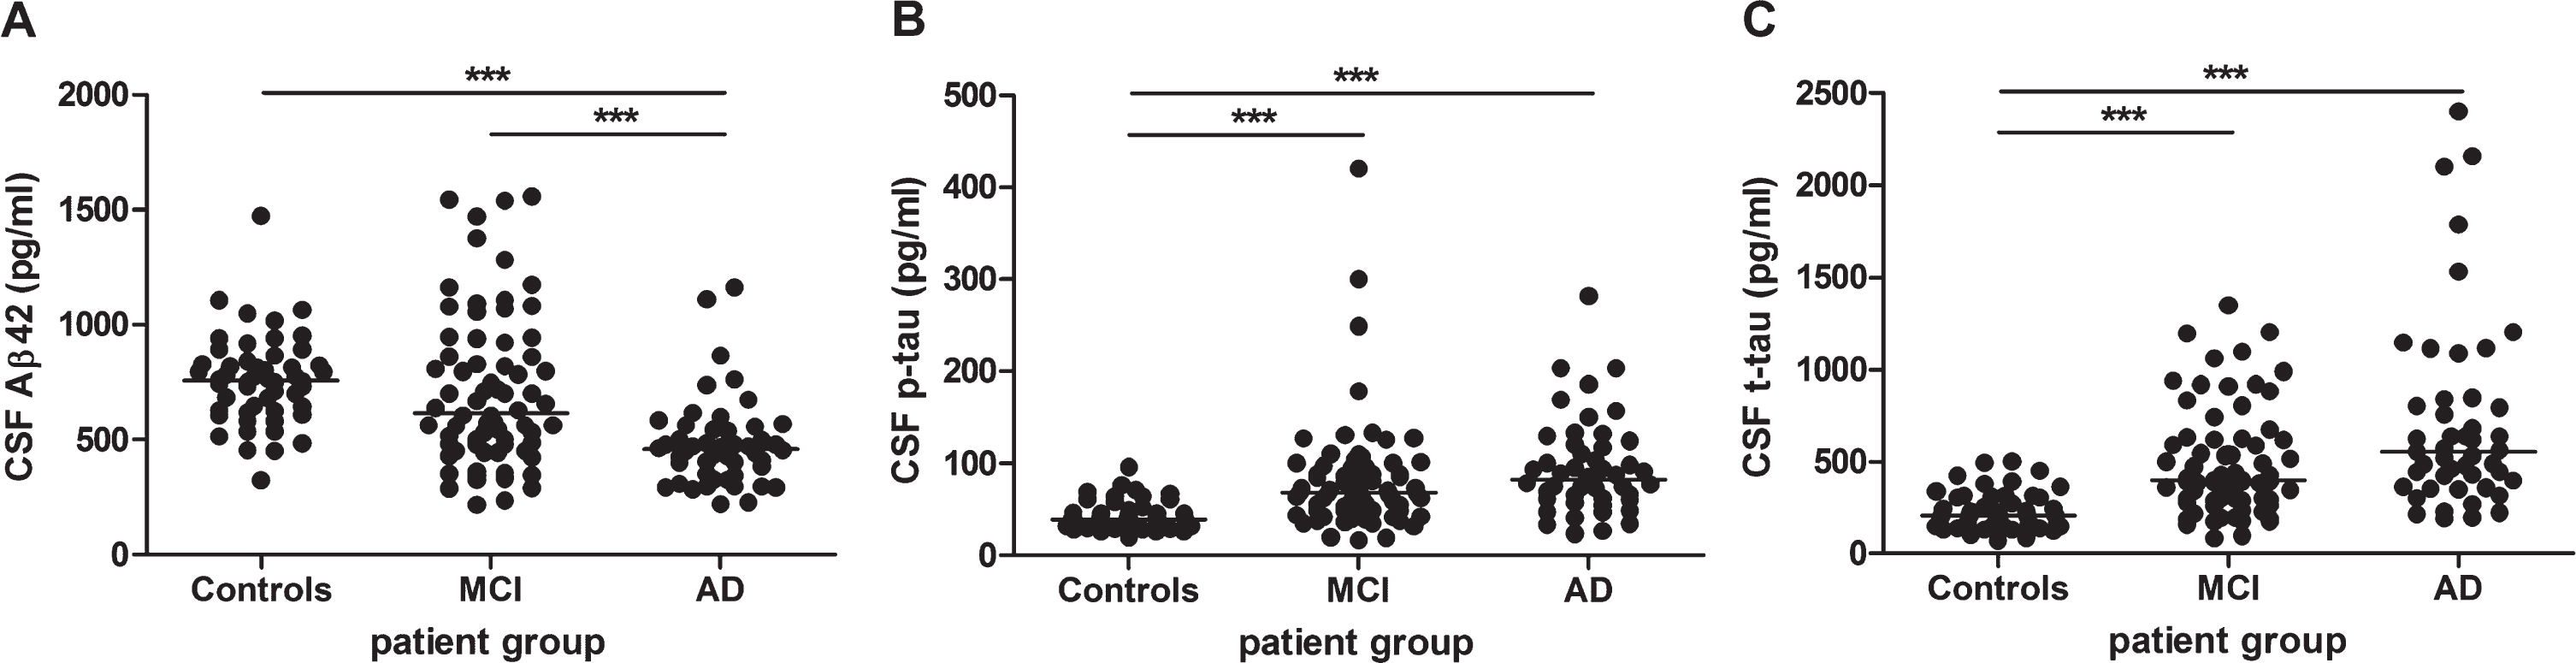 Analysis of AD CSF biomarkers: Aβ42 (n = 172), p-tau (n = 172), and t-tau (n = 168) in healthy controls, MCI, and AD patients. Analysis of (A) Aβ42 in healthy controls (n = 52), mild cognitive impairment (MCI) (n = 72), and Alzheimer’s disease (AD) patients (n = 48), (B) p-tau in healthy controls (n = 52), MCI (n = 72), and AD patients (n = 48) and (C) t-tau in healthy controls (n = 52), MCI (n = 69), and AD patients (n = 47). Solid bar = median; p-value: ***p < 0.001 (Kruskal-Wallis with Dunn’s post hoc test).